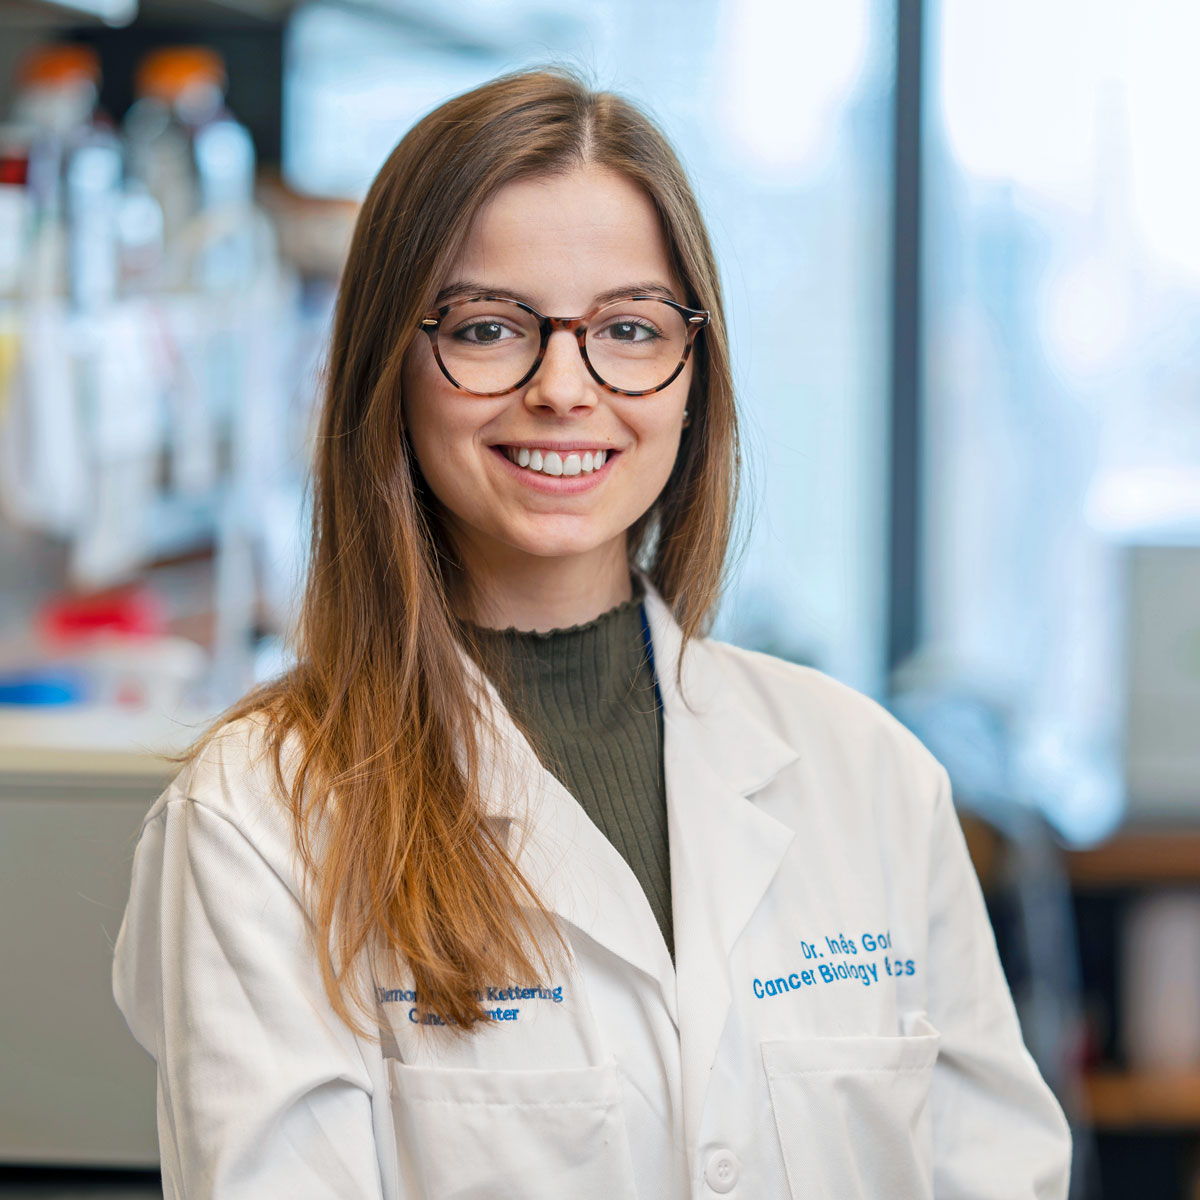 Welcome to the Massague Lab: Ines Godet joined in January from Johns Hopkins University, Maryland🔬